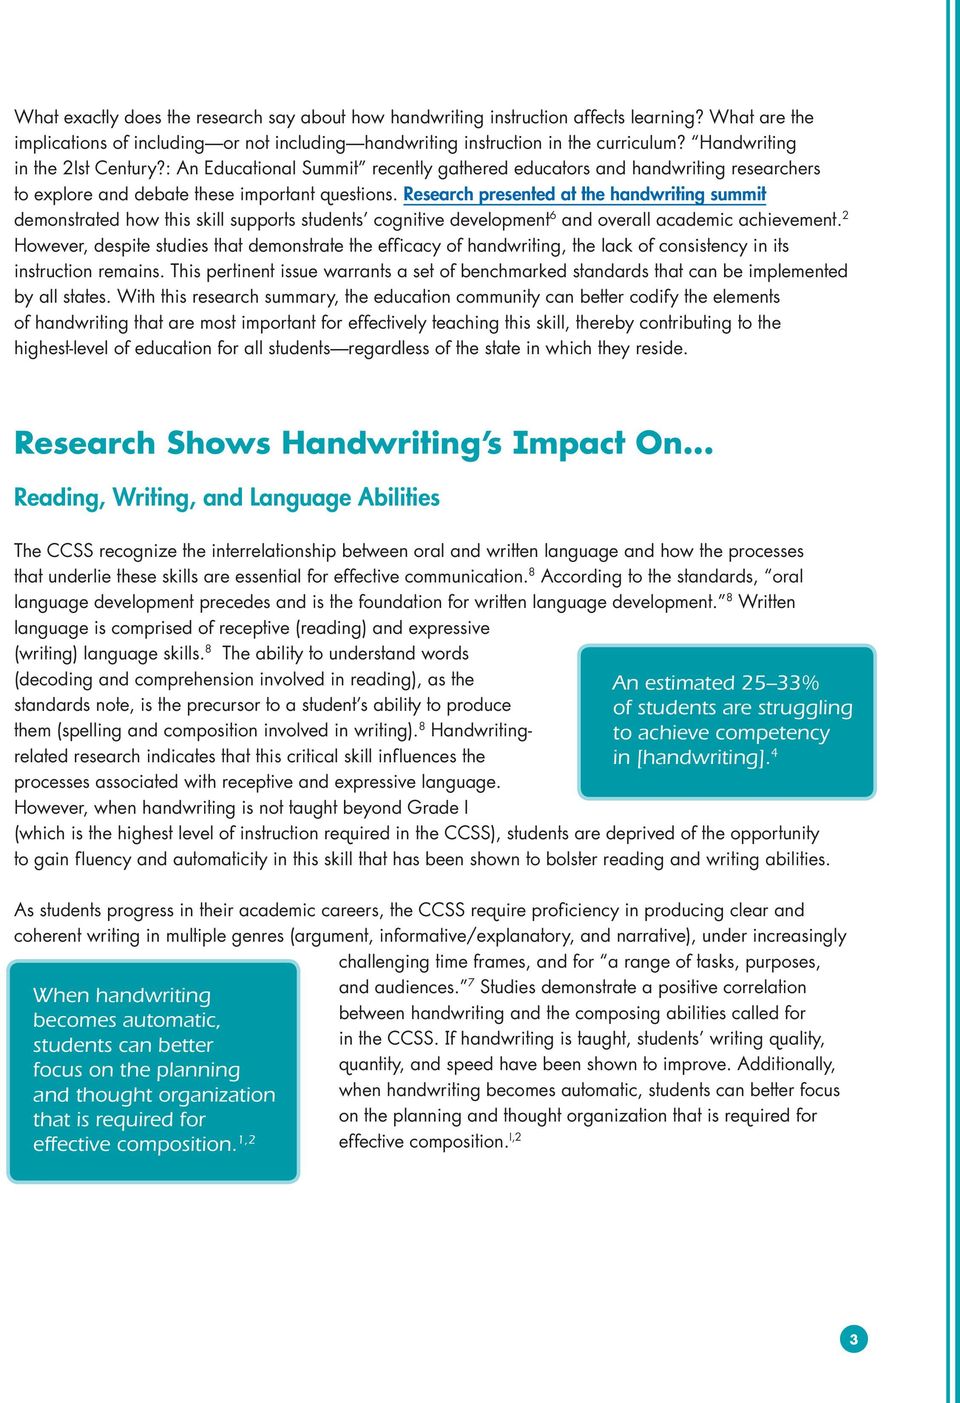 Research presented at the handwriting summit demonstrated how this skill supports students cognitive development 6 and overall academic achievement.